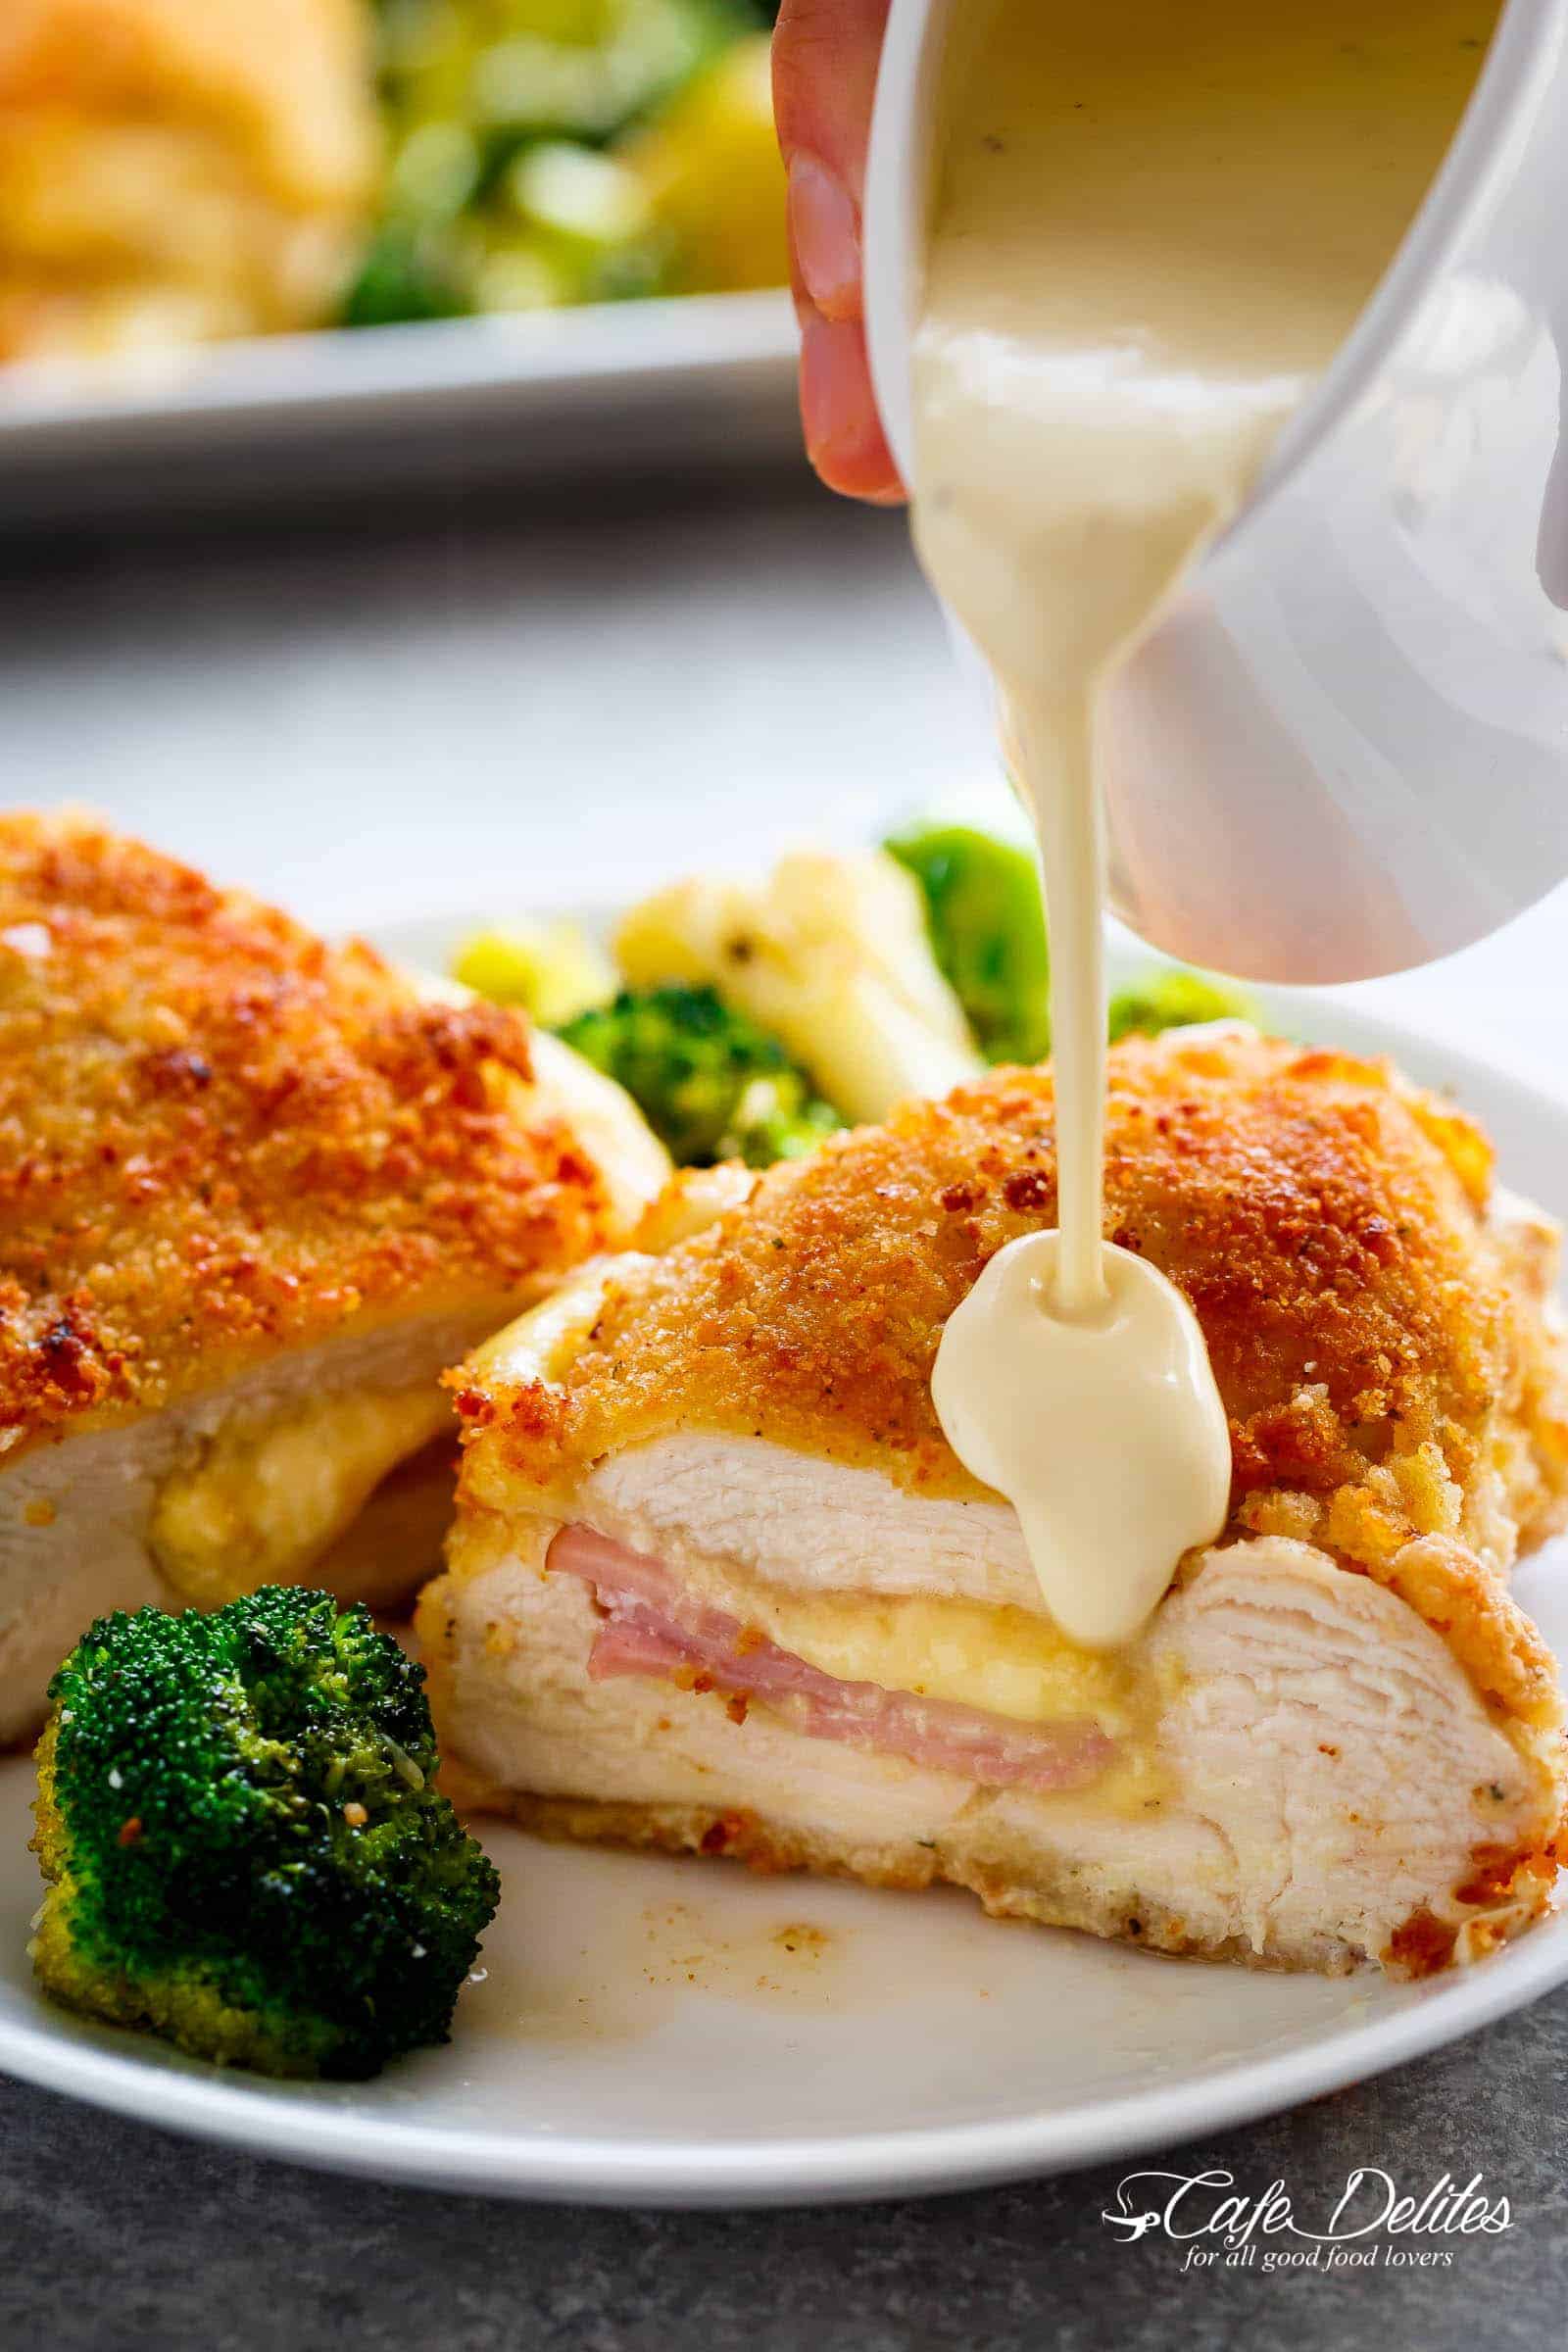 Easy Sheet Pan Chicken Cordon Bleu is a complete dinner for the entire family! Crispy crumbed chicken breasts filled with Dijon mustard, Swiss cheese and ham, baked with vegetables and served with an incredible Dijon Cream Sauce for the ultimate restaurant feel right at home!